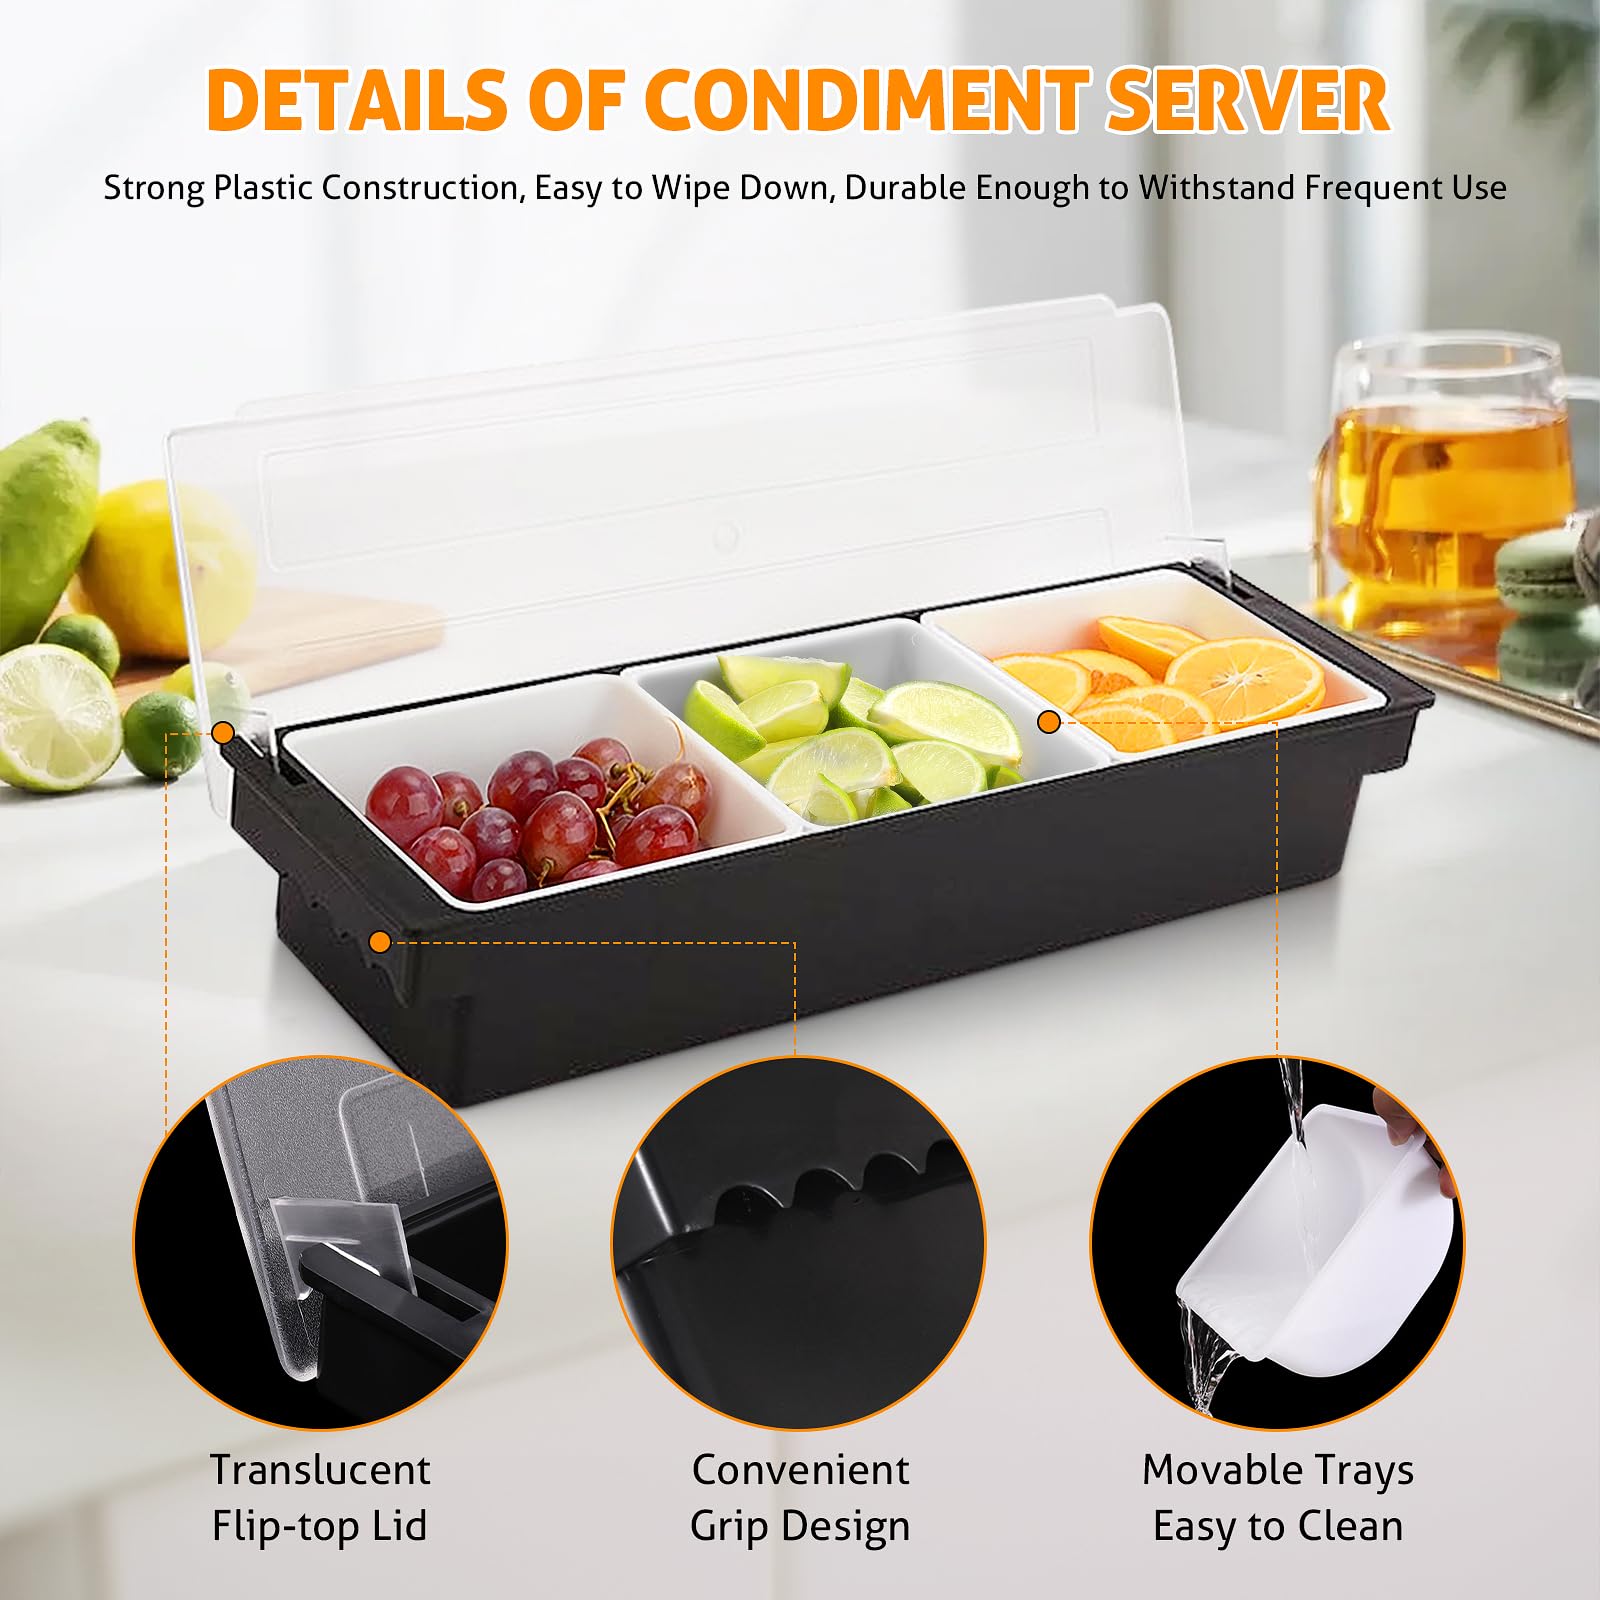 WICHEMI Fruit, Veggie & Condiment Caddy with Lid Dispenser Tray Plastic Garnish Station for Bartending & Serving Taco, Ice Cream, Salad Bar - Topping Organizer for Restaurant Supplies (3 Compartment)